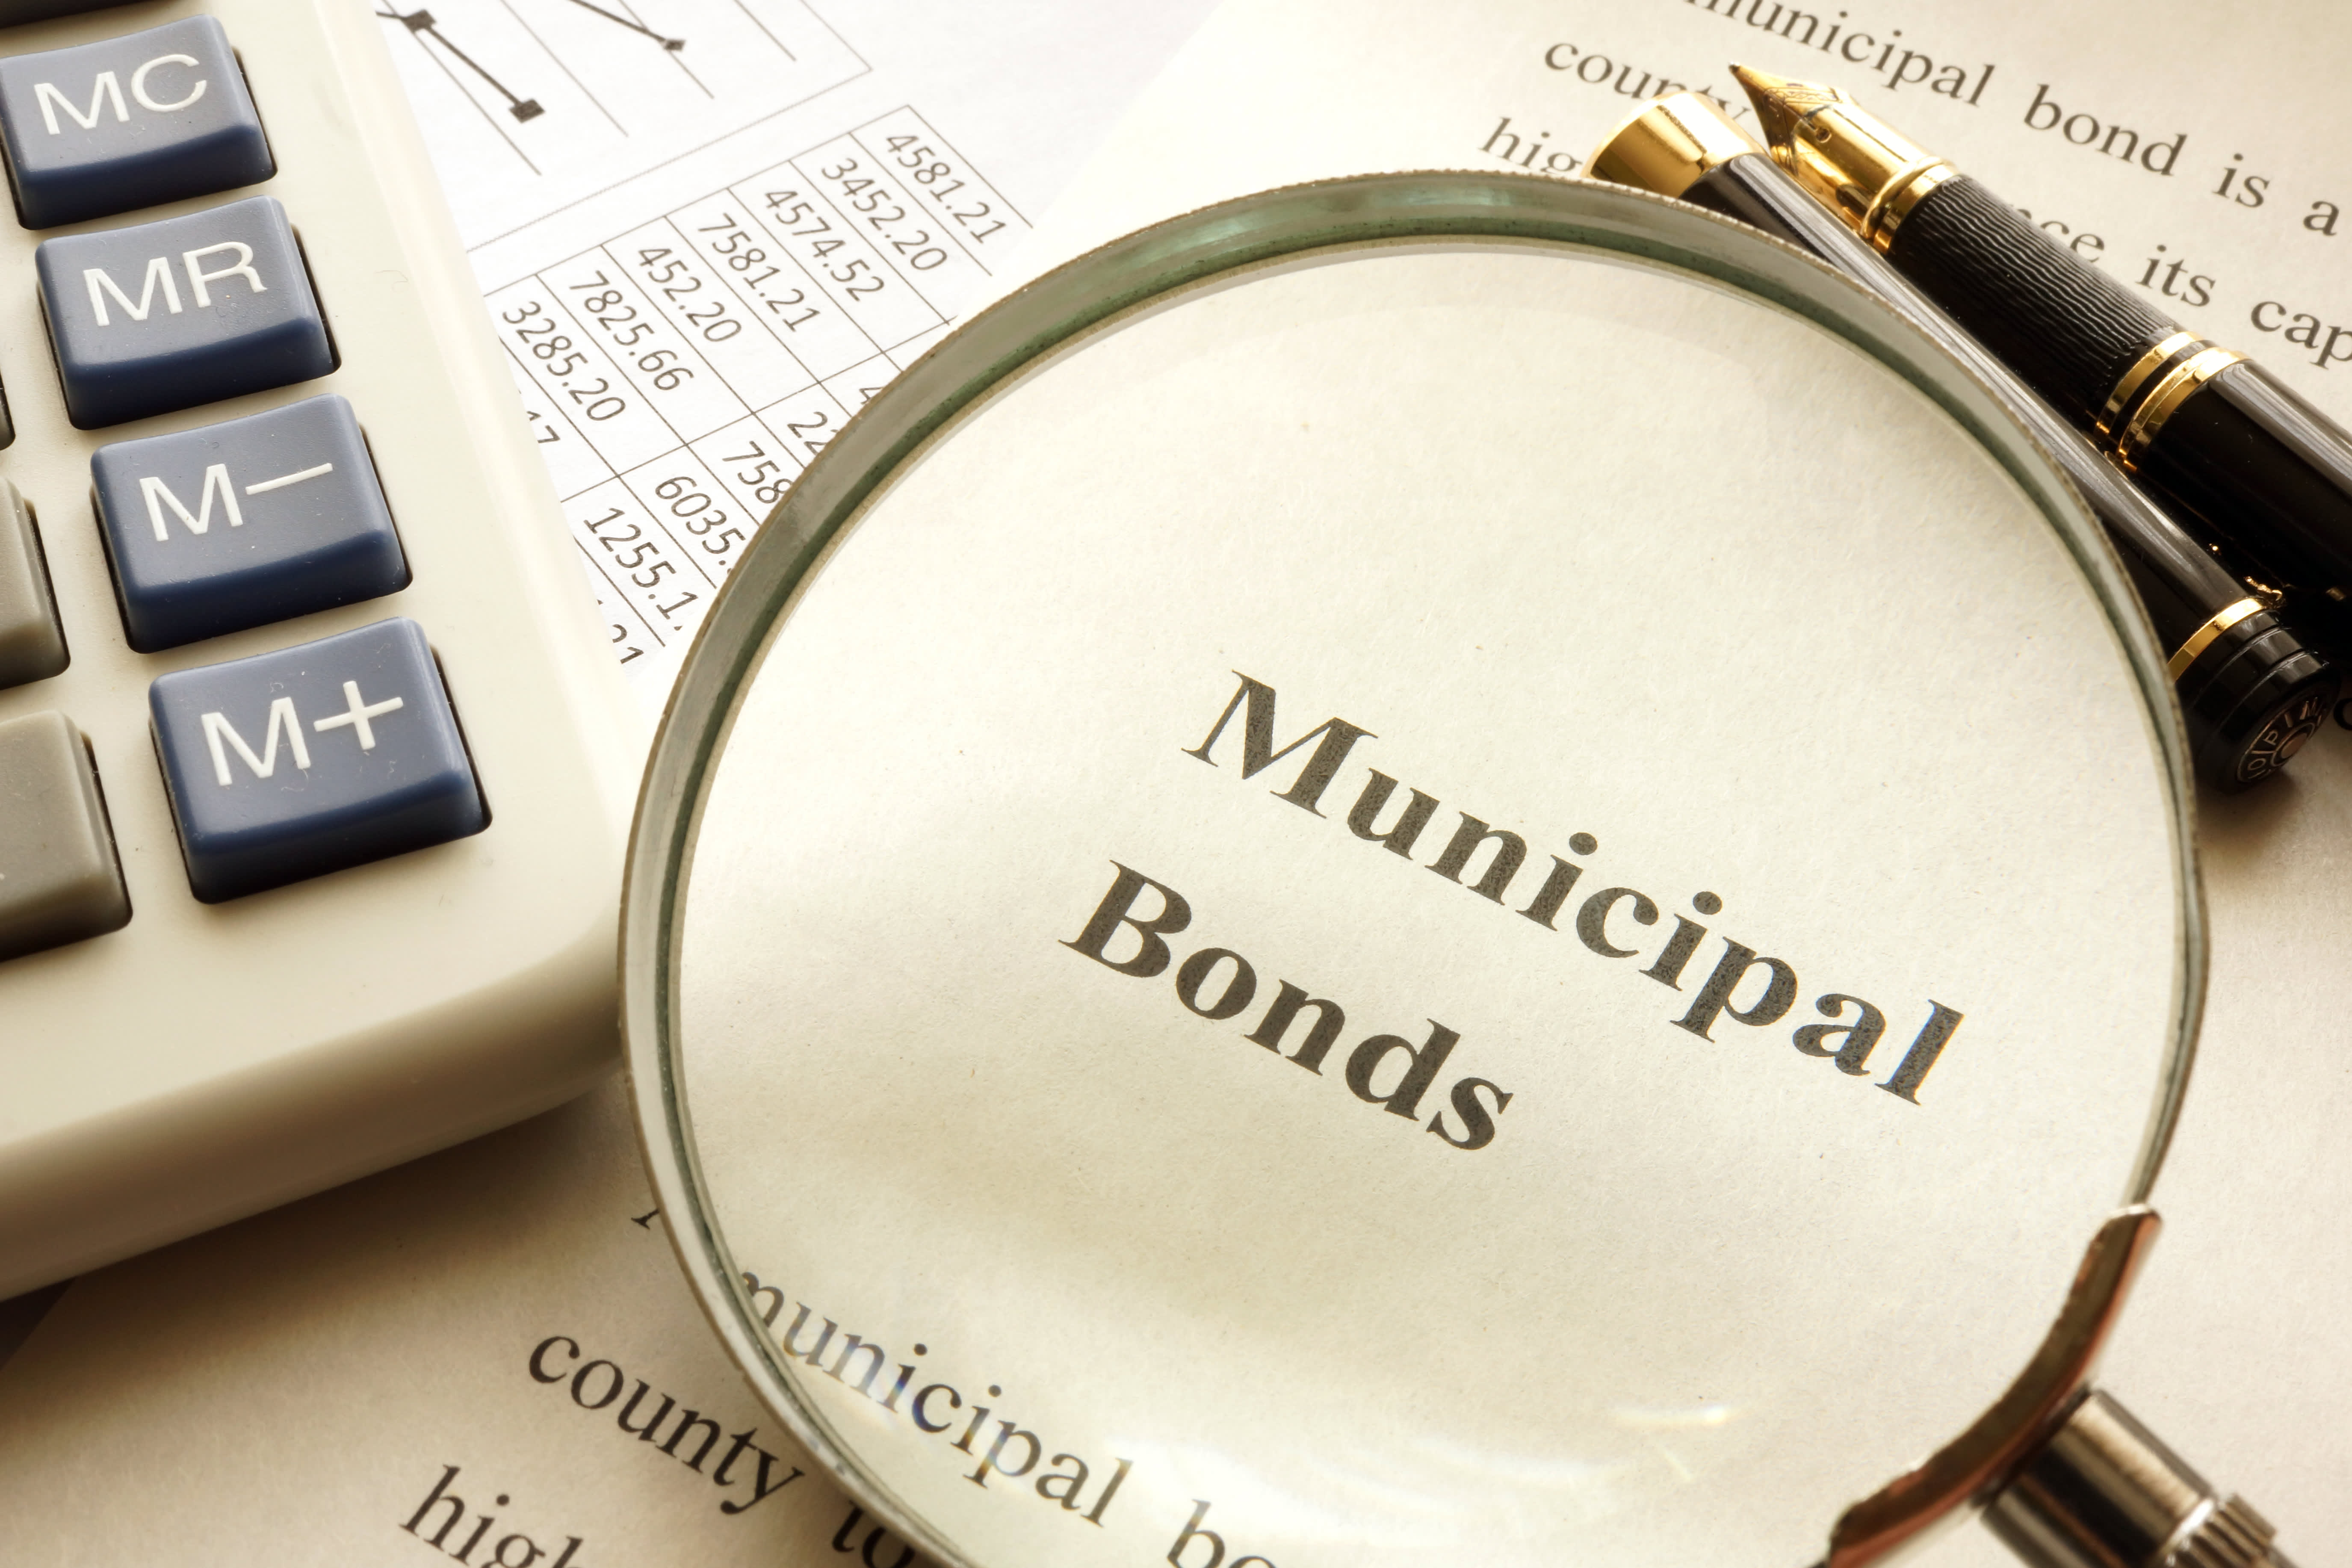 Beauty of muni bonds is tax-free income. Here are three key takeaways for investors